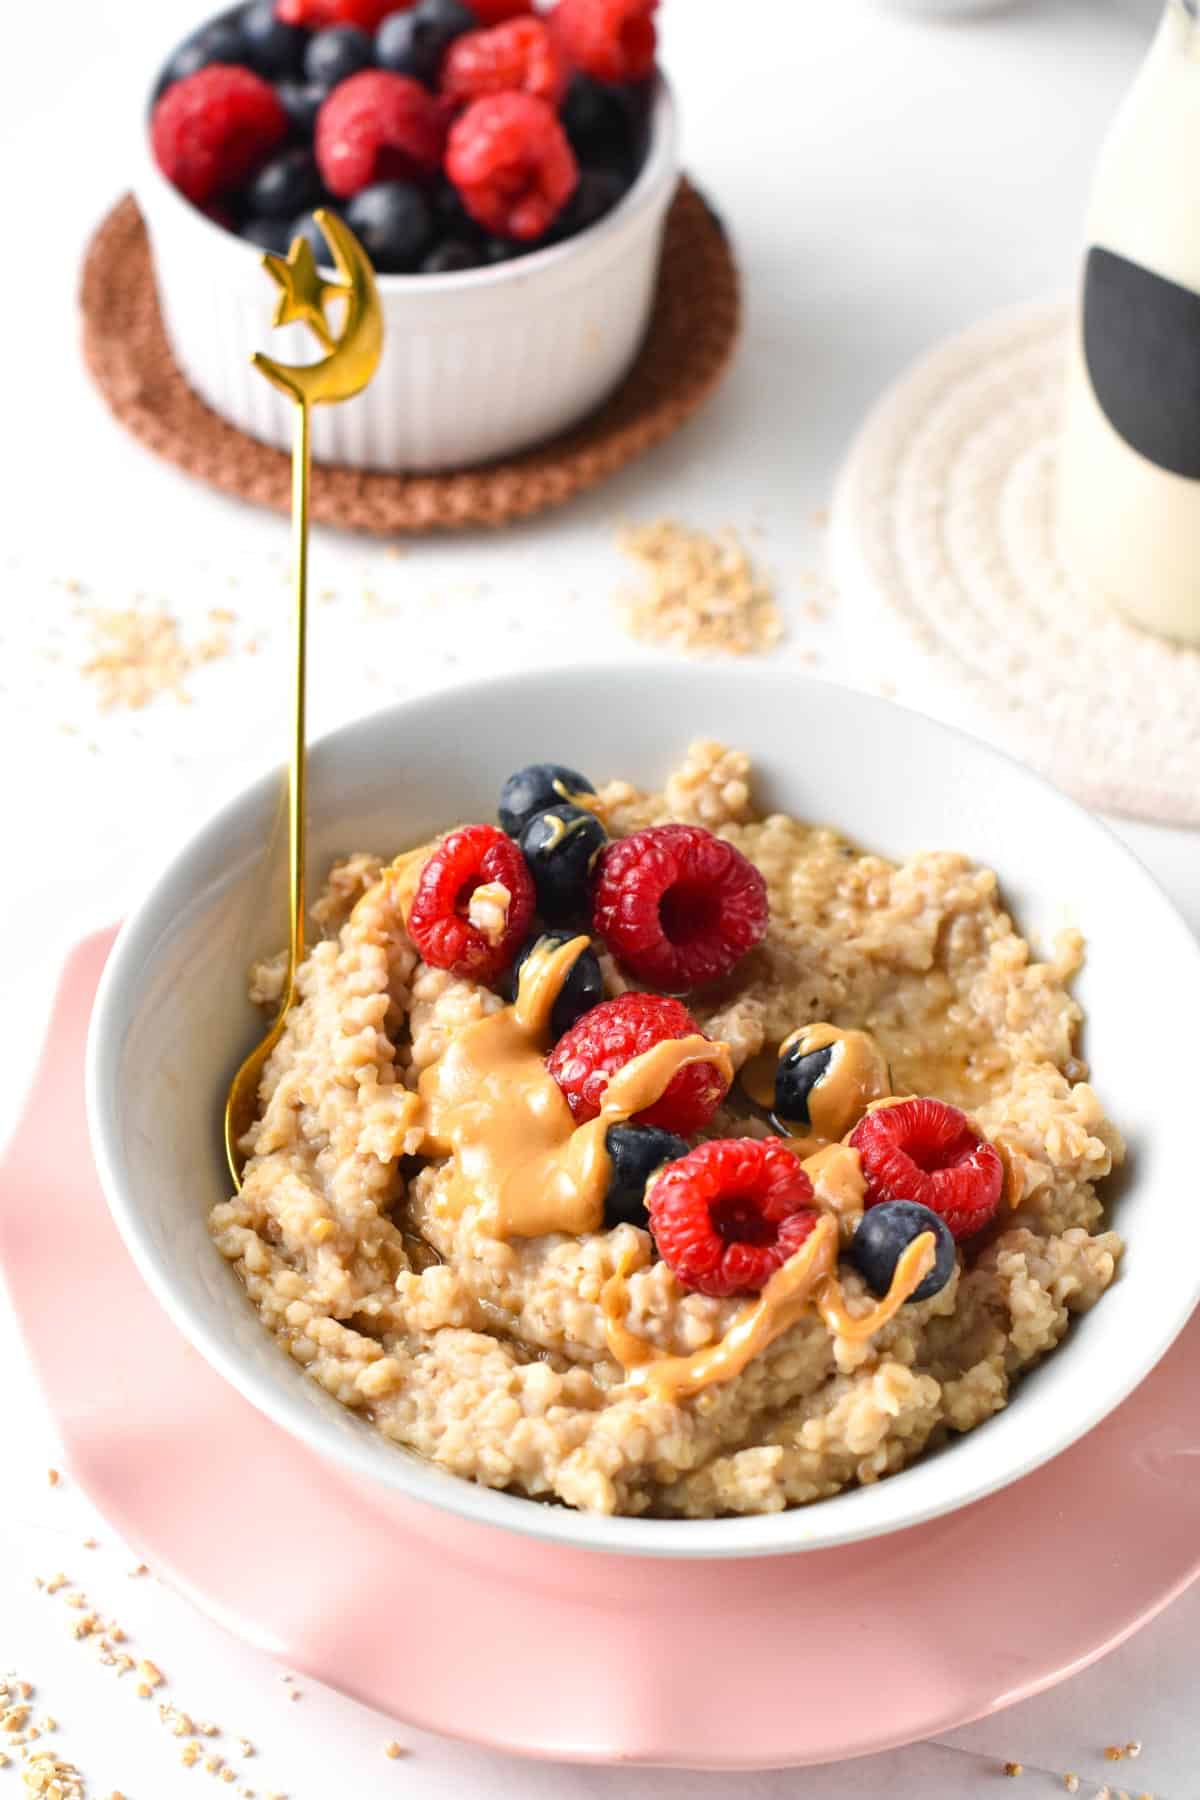 Enjoy a creamy breakfast with this Protein Steel cut Oats recipe packed with 22 grams of protein per serve.